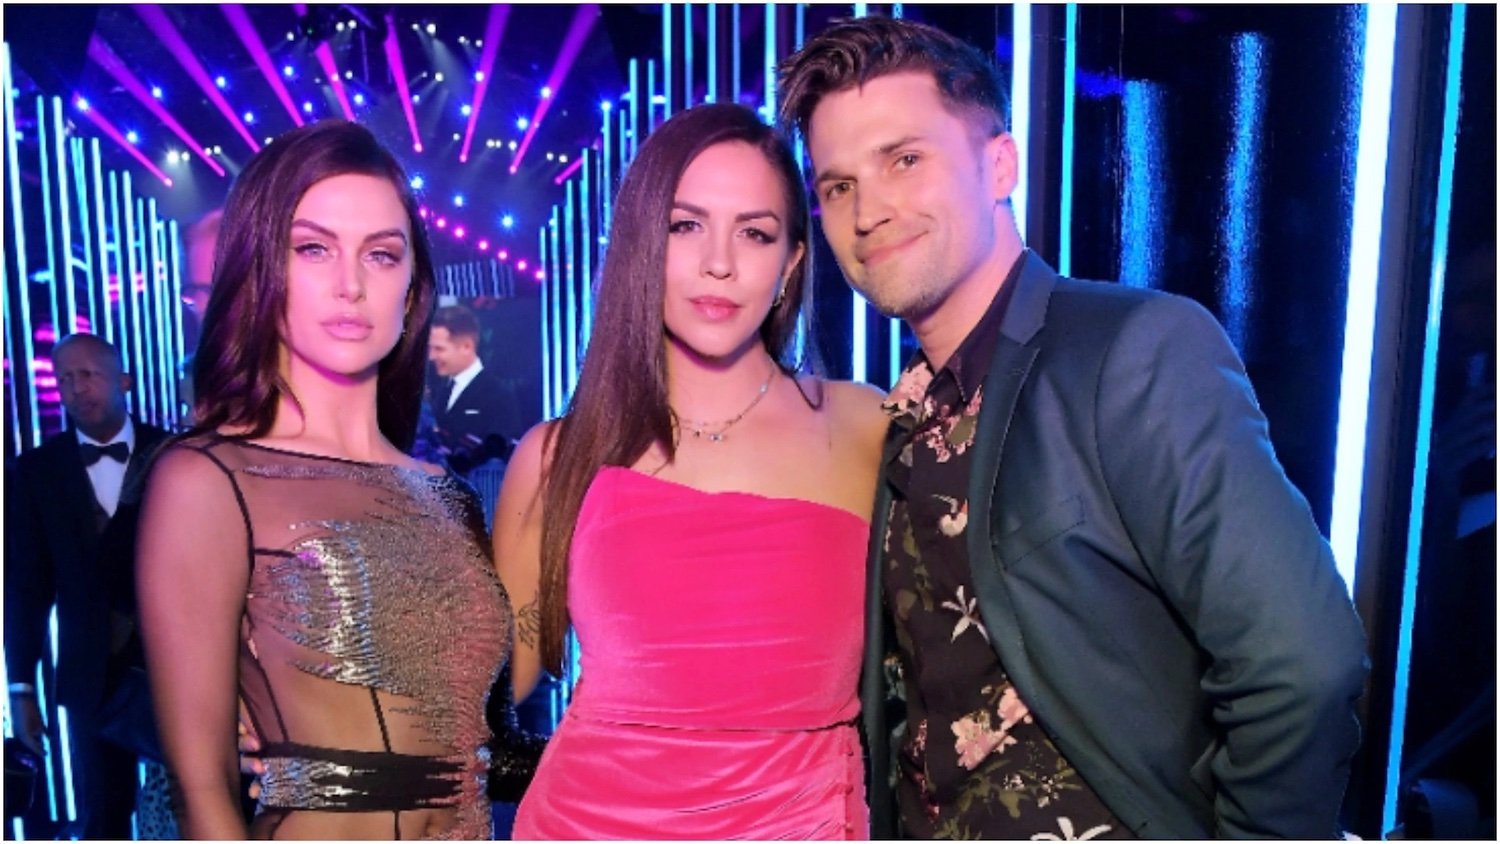 The 'Vanderpump Rules' Season 10 cast includes Lala Kent, Katie Maloney, and Tom Schwartz, seen here at an event.